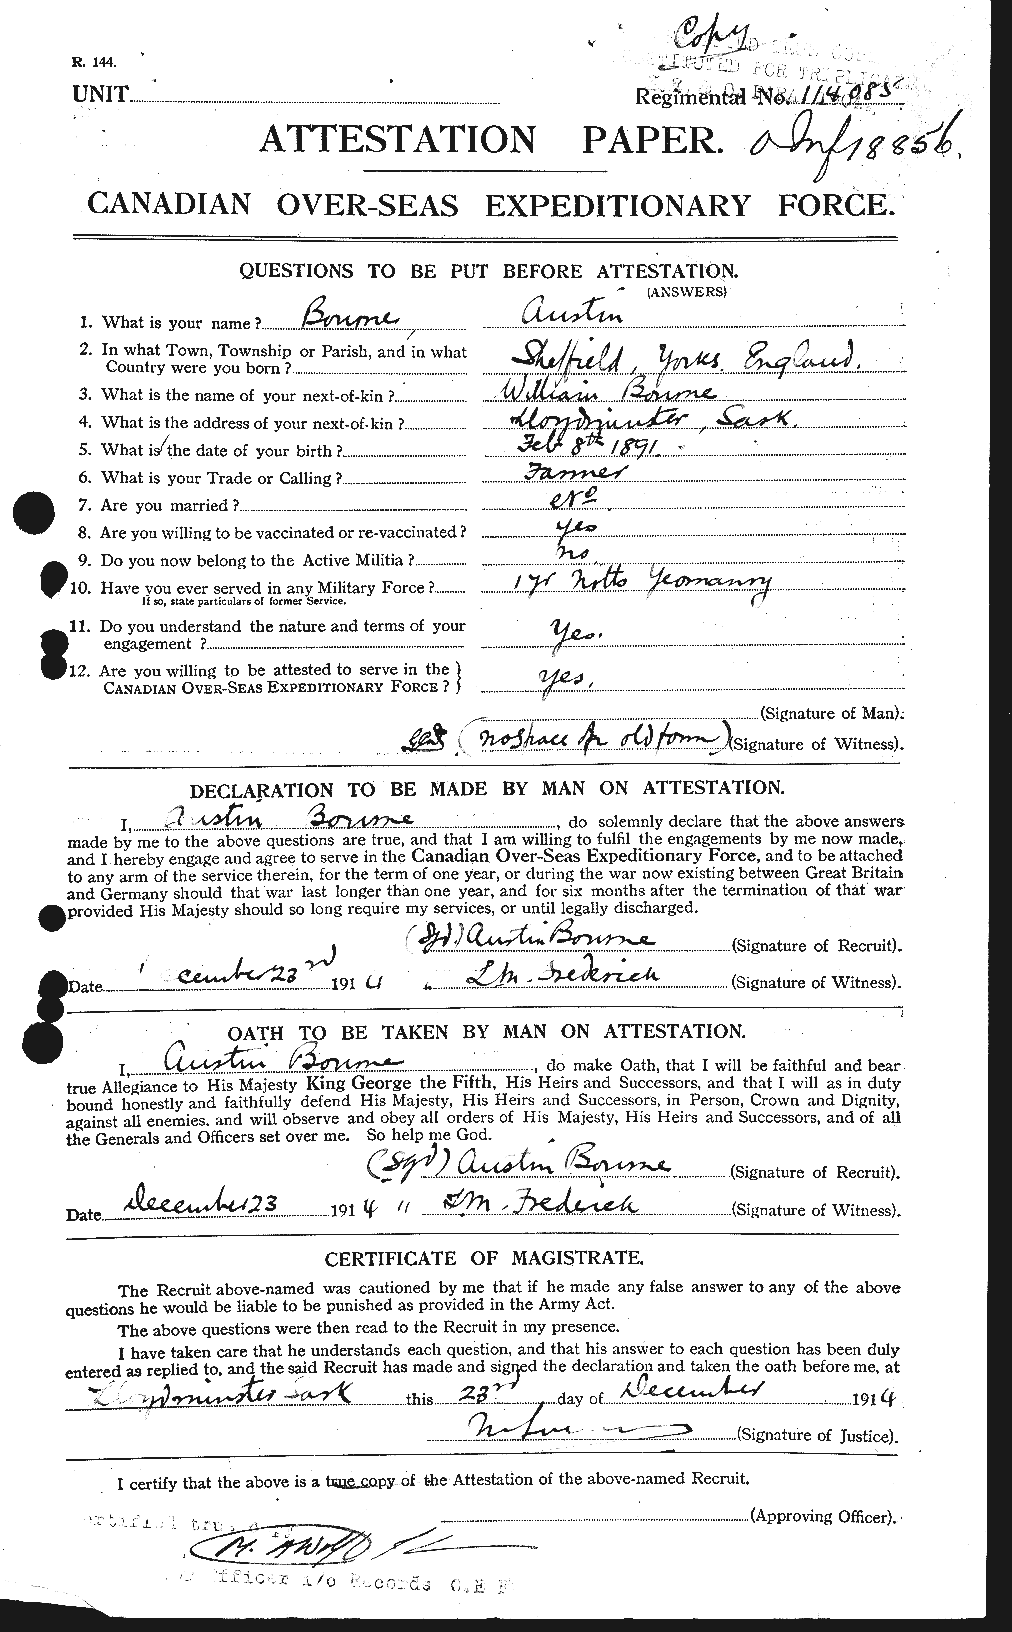 Personnel Records of the First World War - CEF 254099a